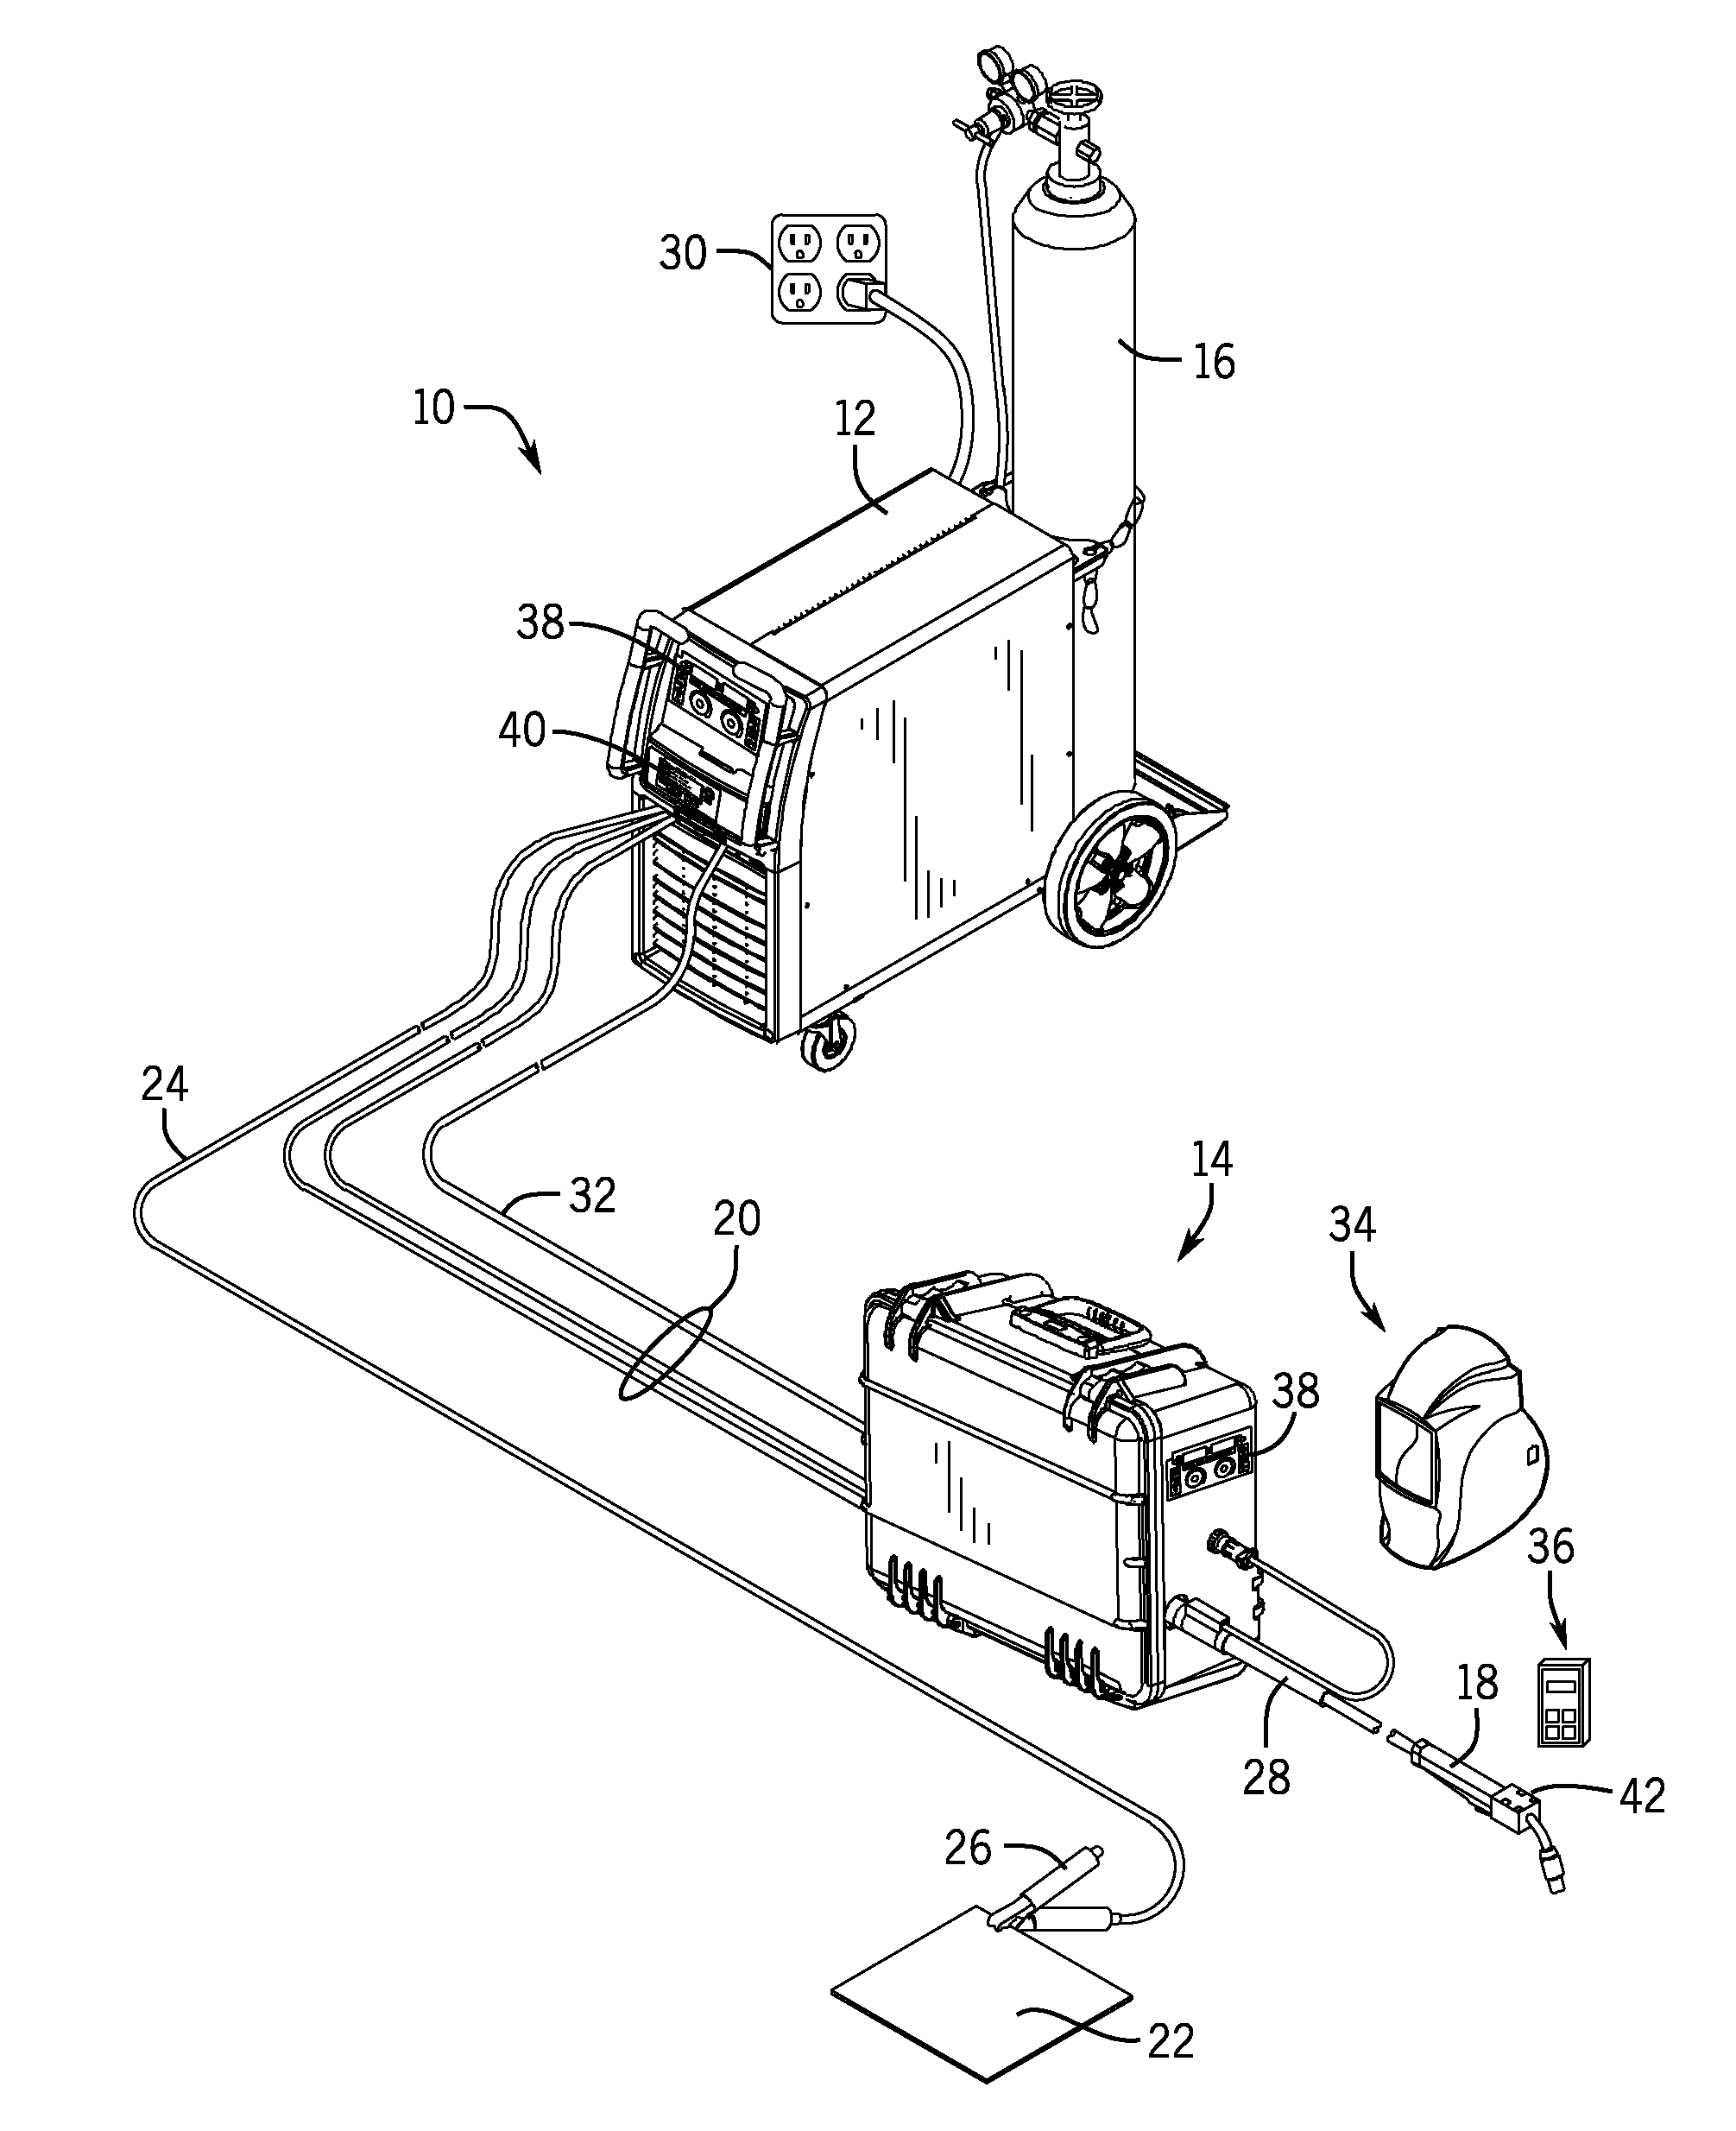 Welding system with multiple user interface modules